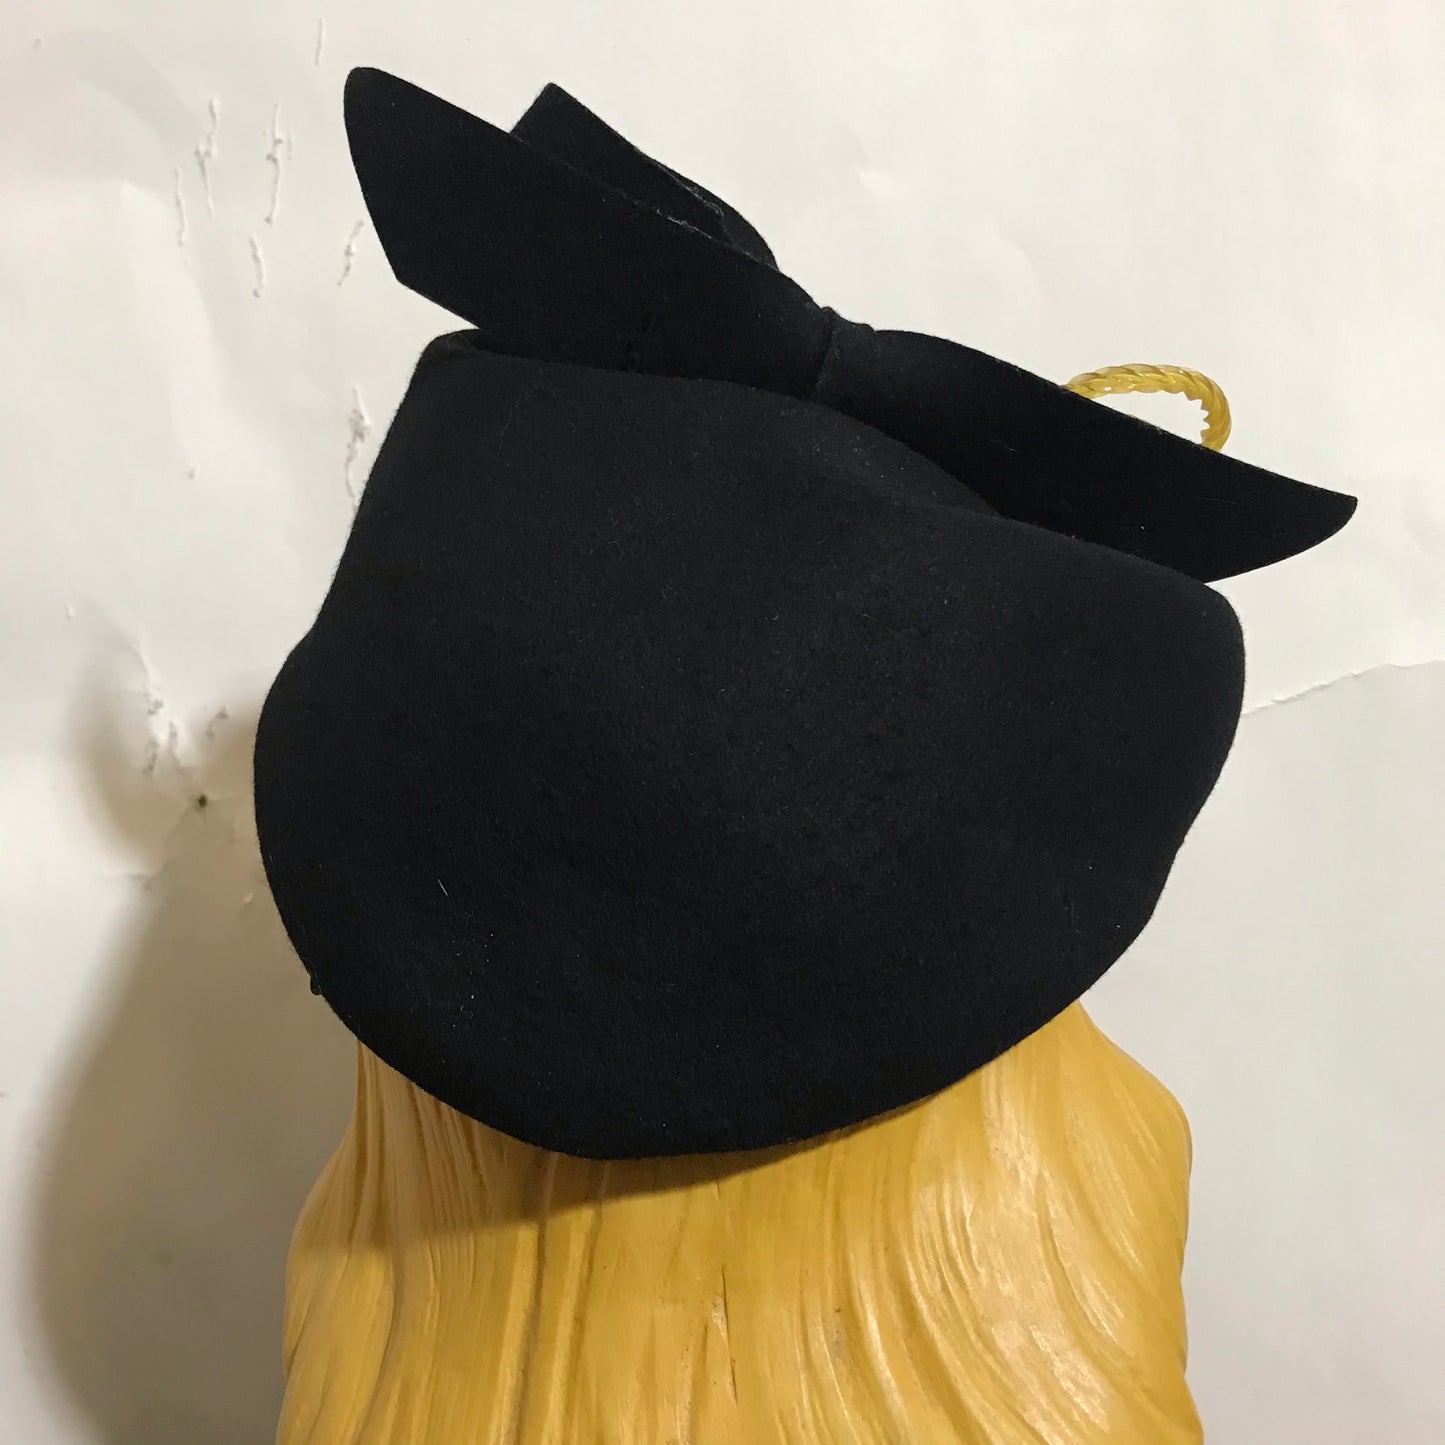 Black Folded Felted Wool Cocktail Hat with Spun Lucite Accent circa 1940s